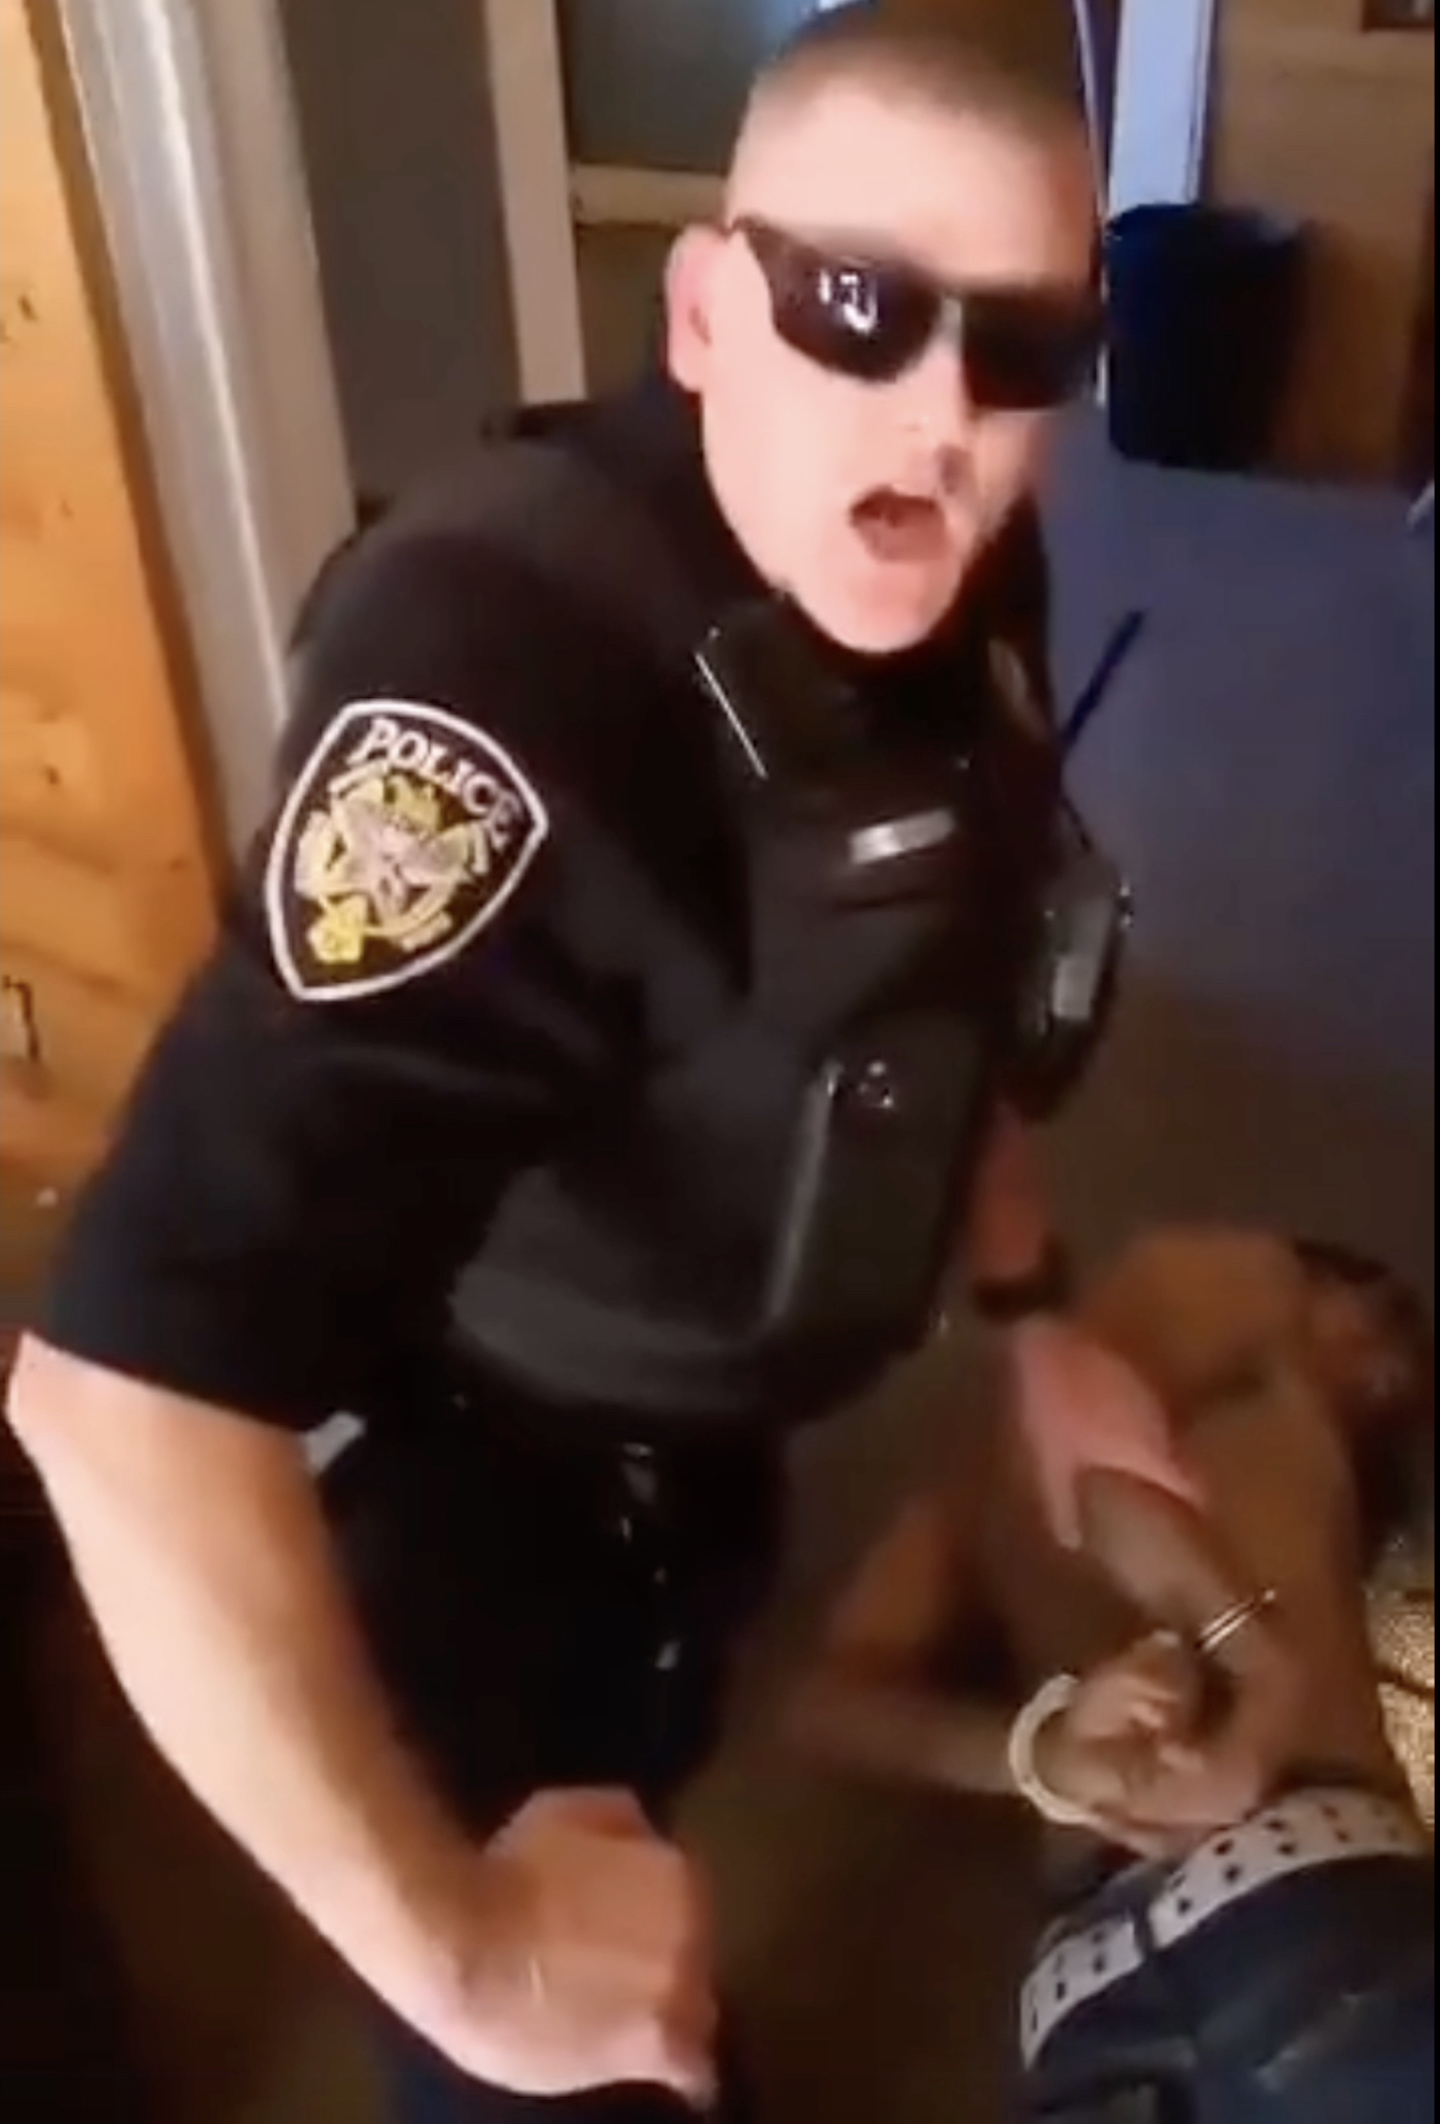 Childress, TX, police enter home of a family without a warrant over an alleged noise complaint. Footage courtesy of Manuel Mata, Texas cop watcher, and the Bermudez family.